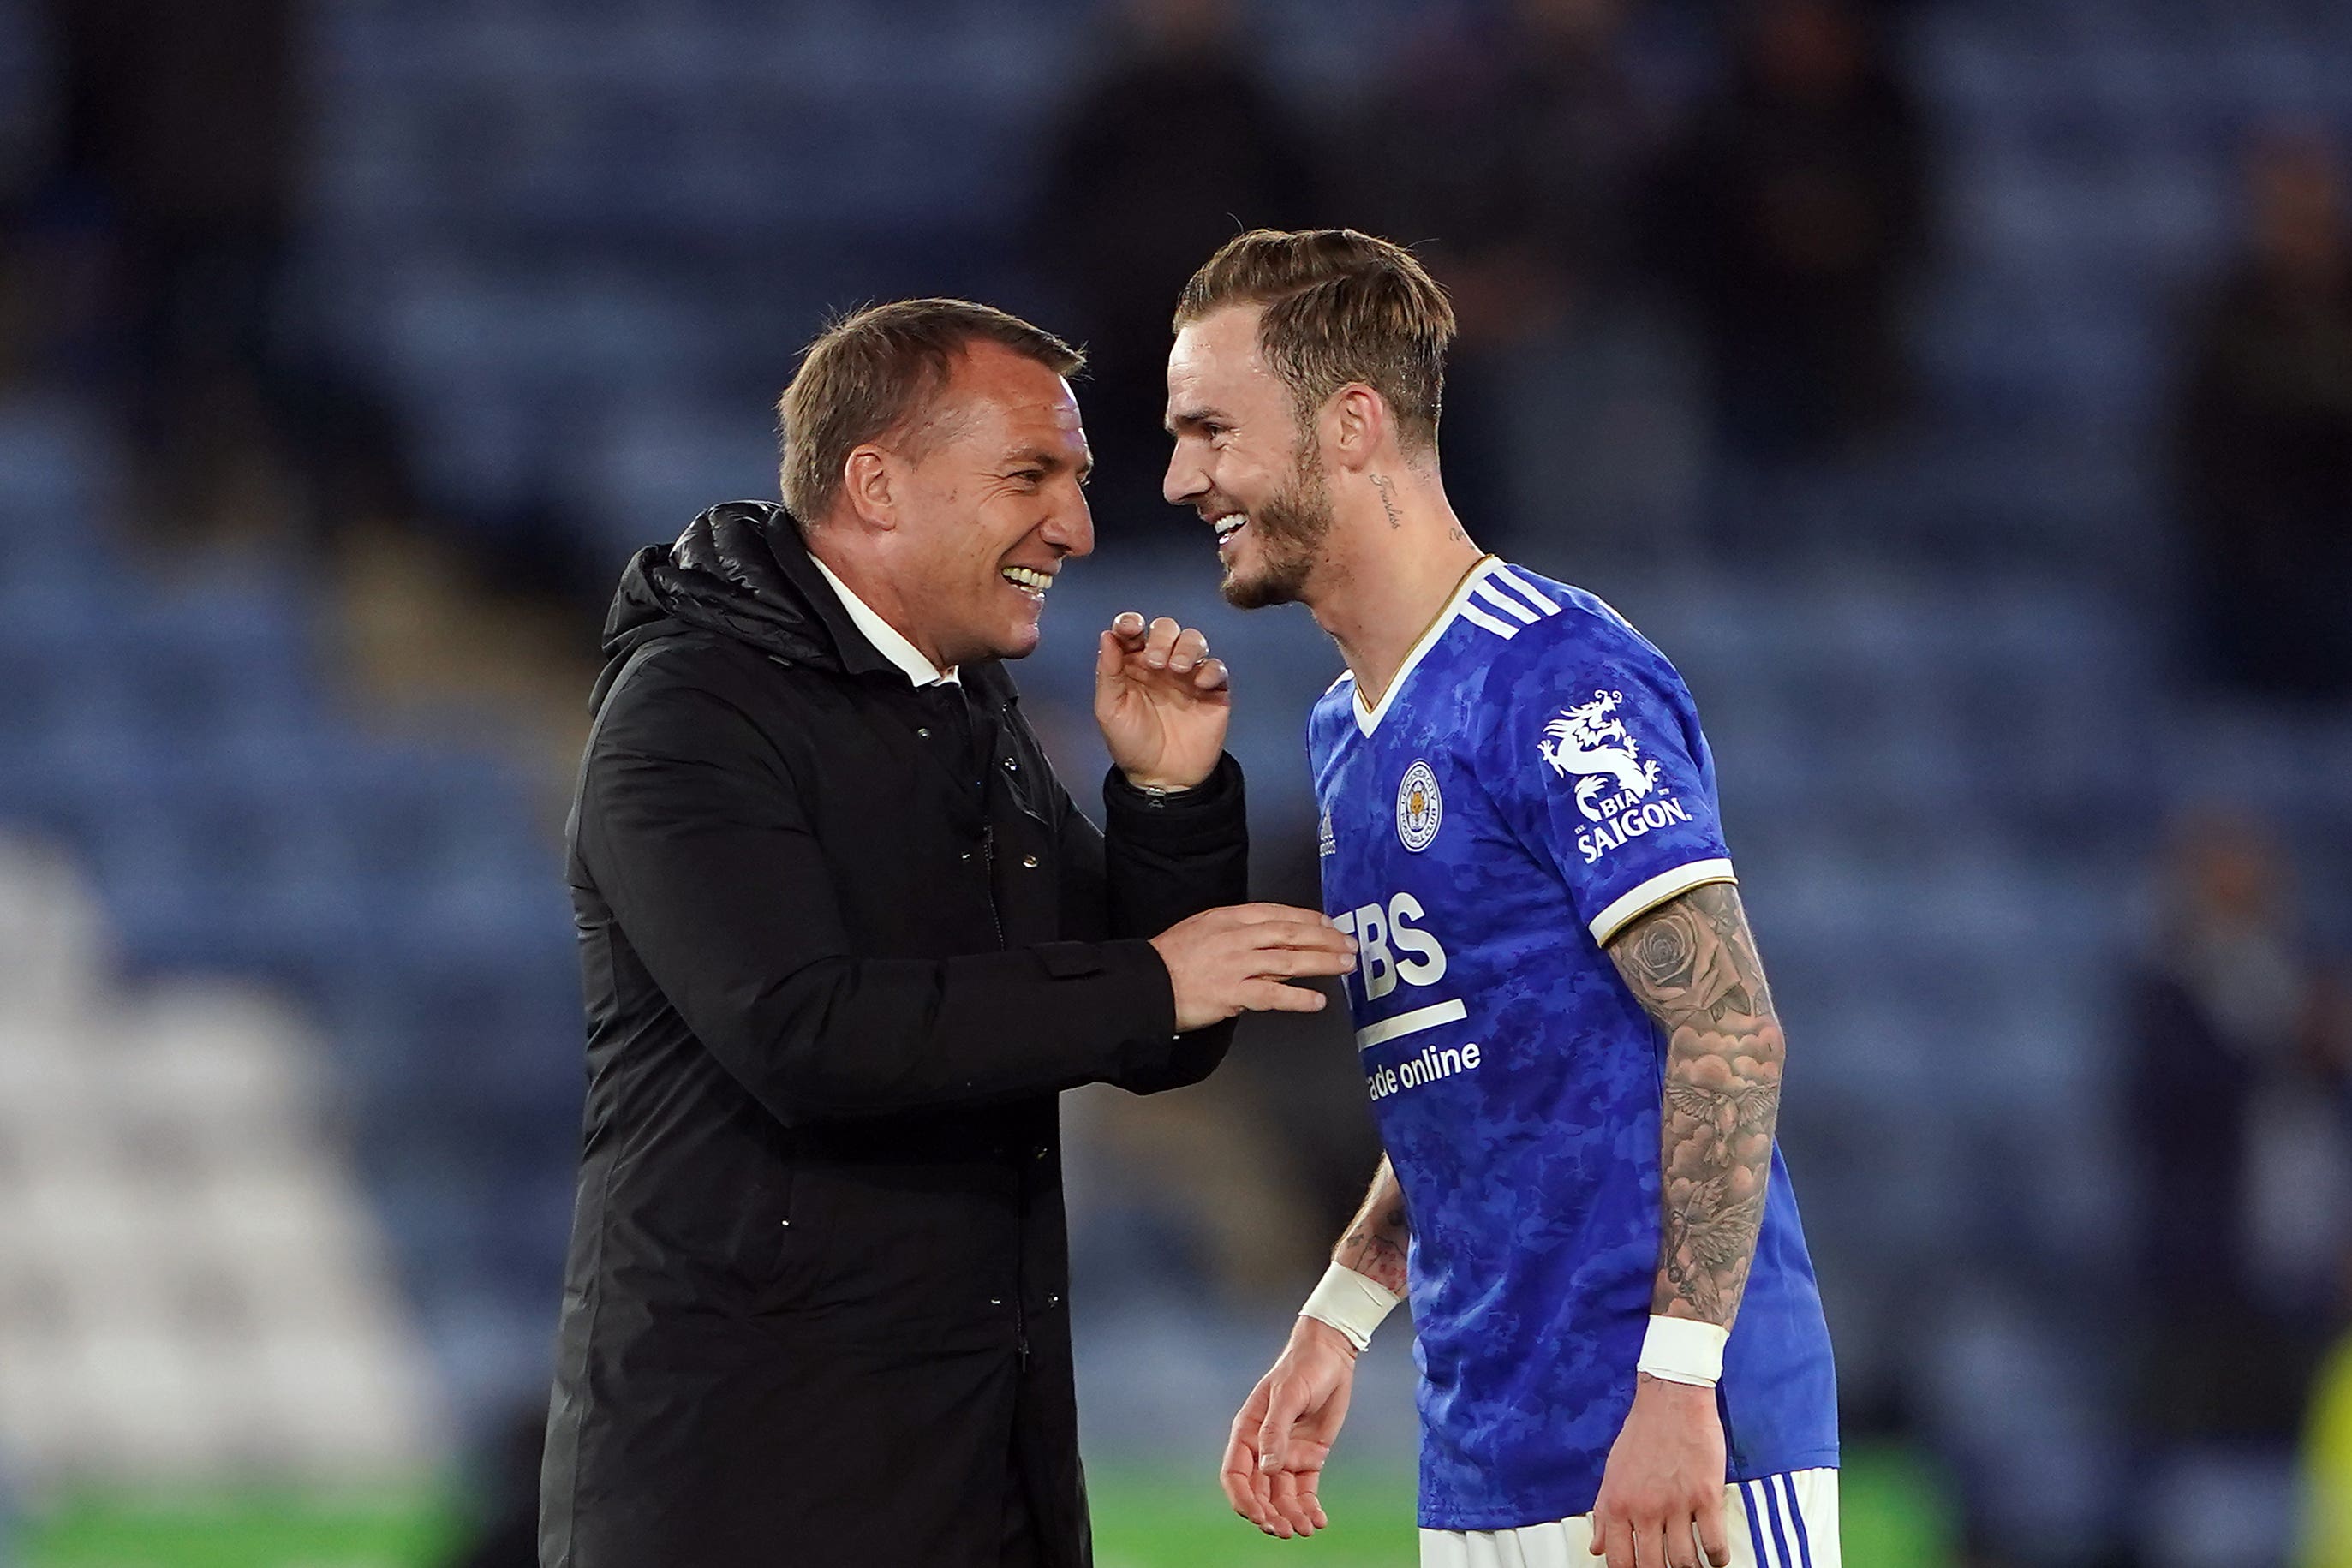 Leicester manager Brendan Rodgers has sung the praises of club captain James Maddison